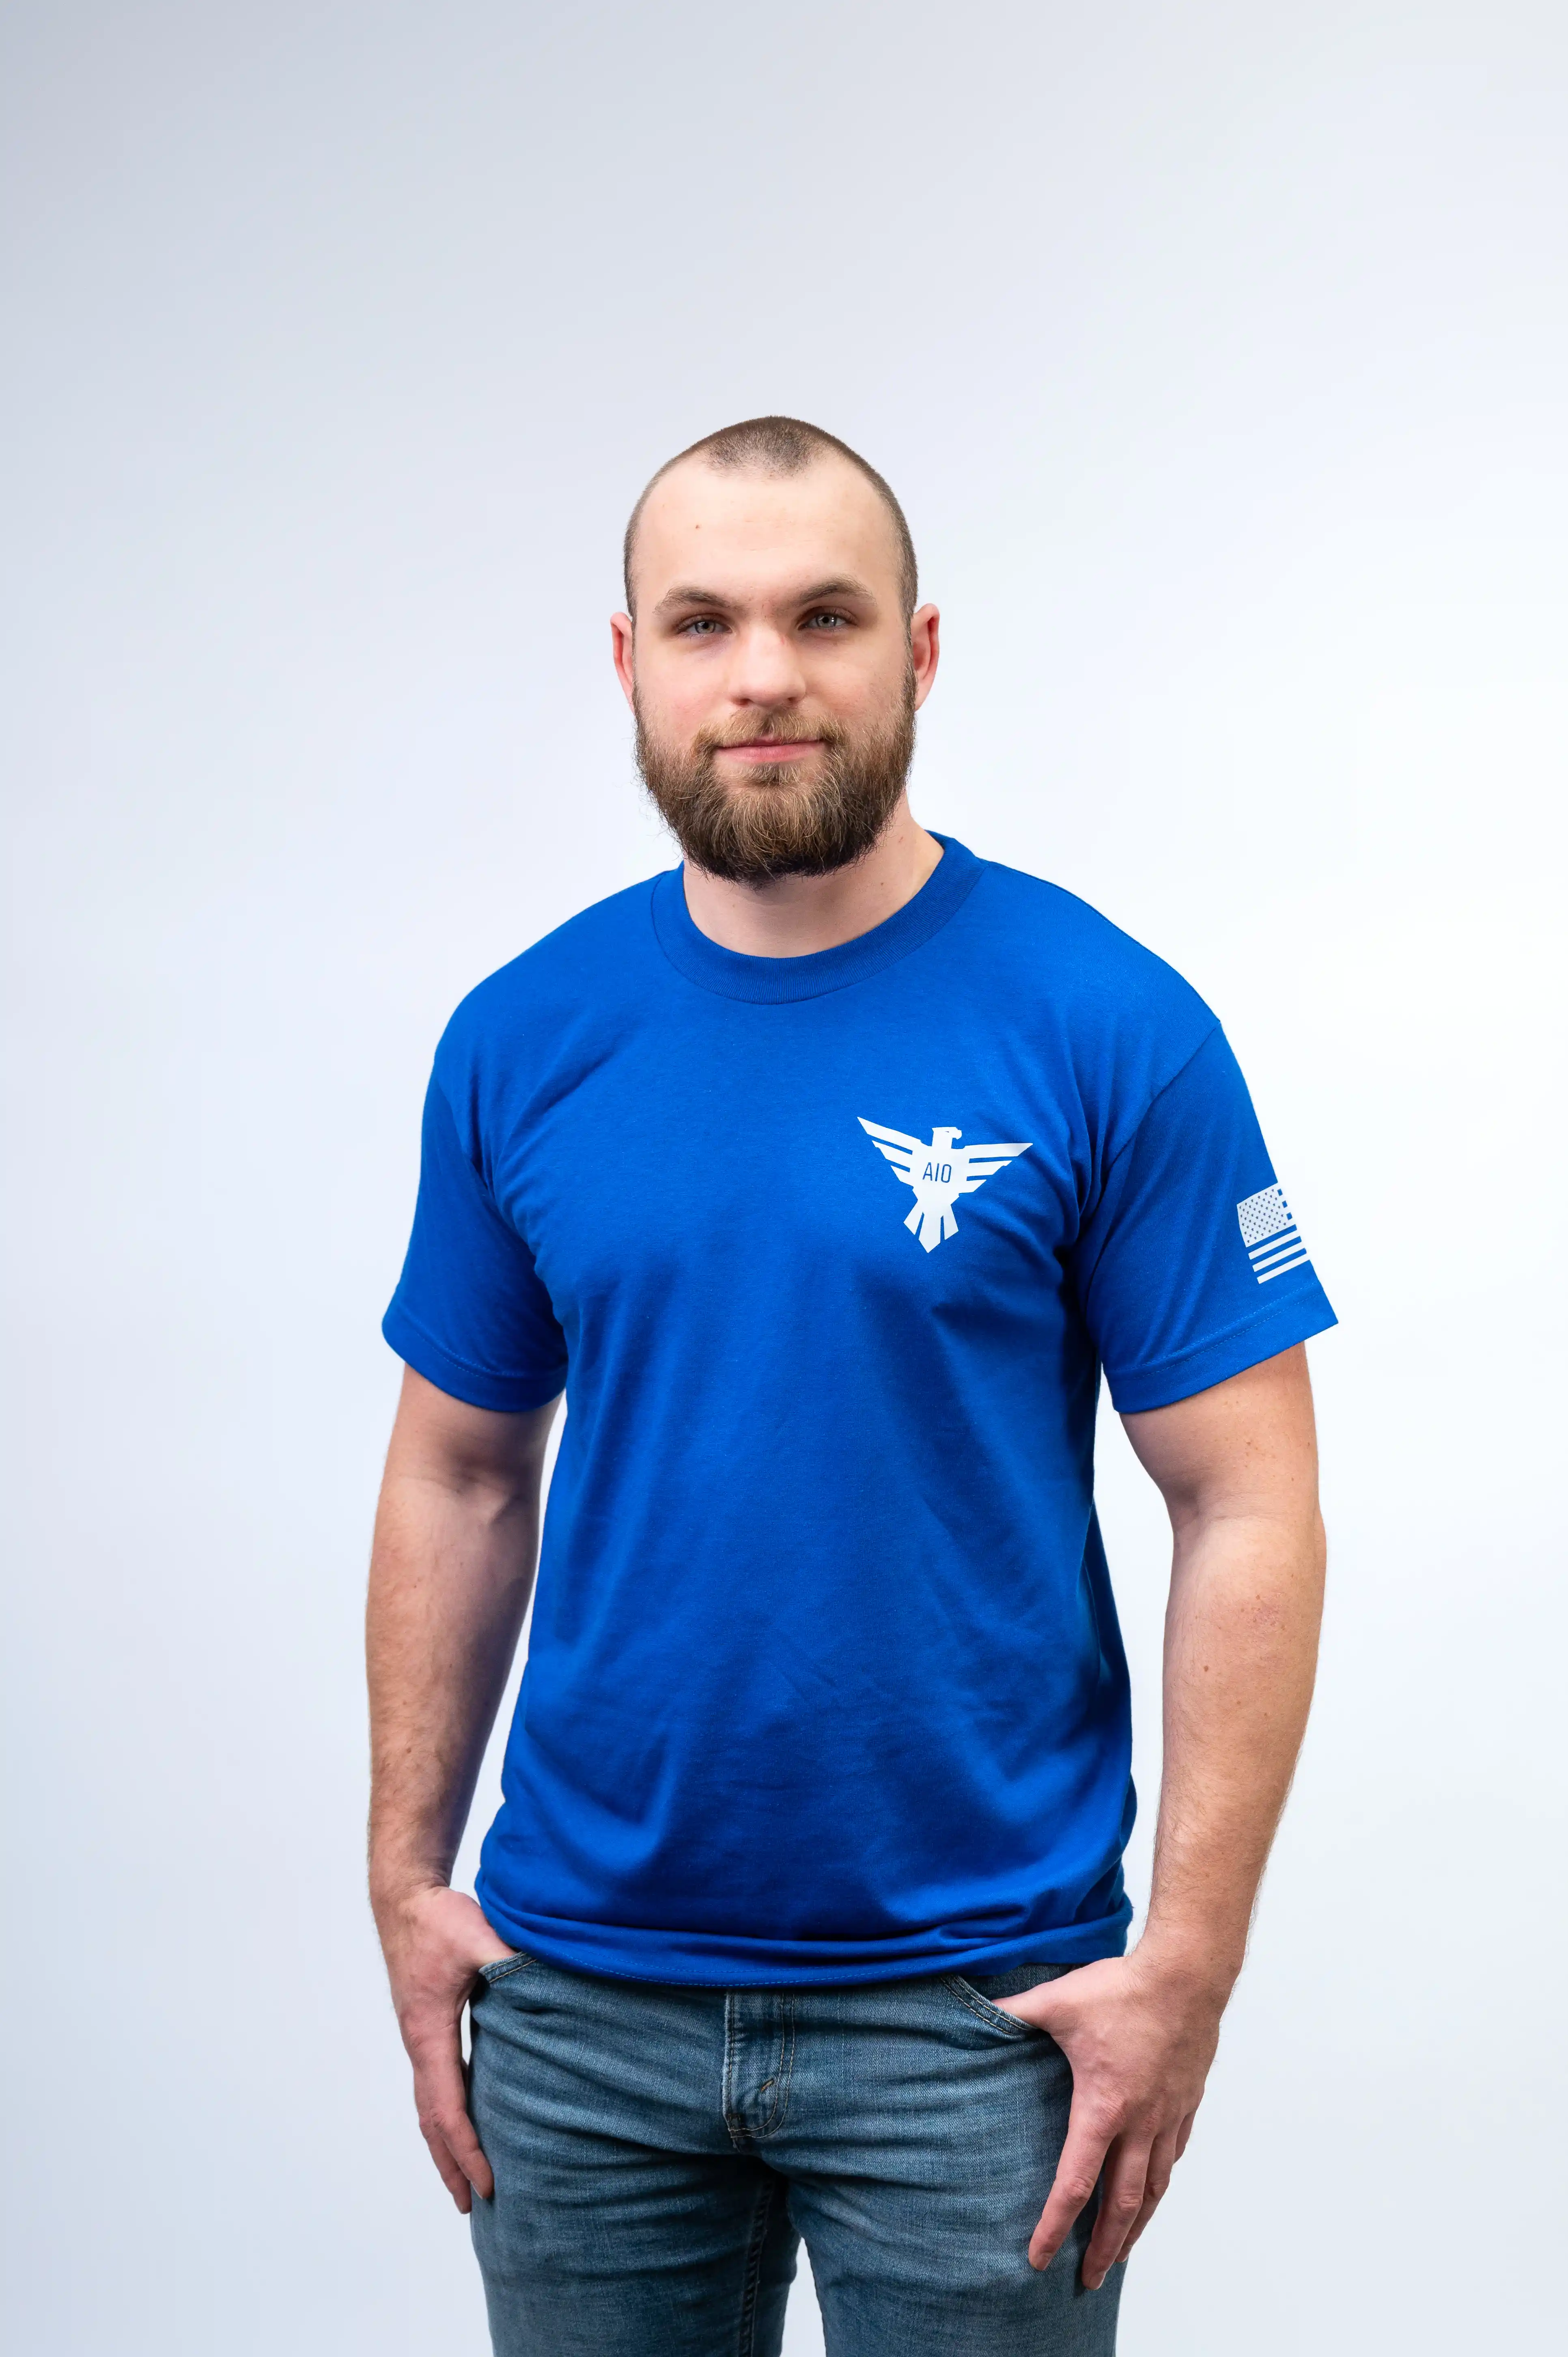 Man with a beard wearing a blue t-shirt standing against a light background.